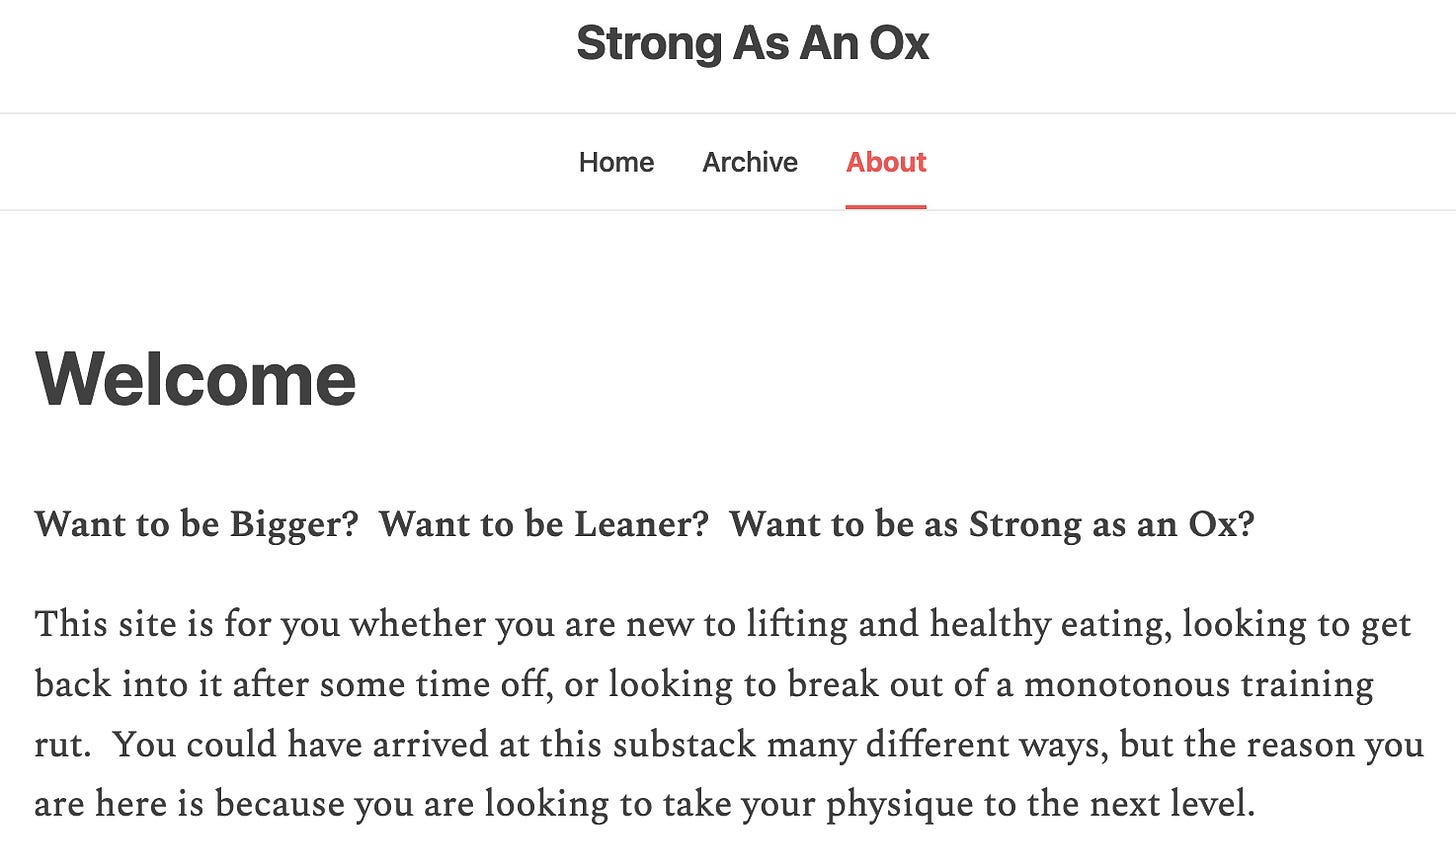 Strong As An Ox Substack About Page